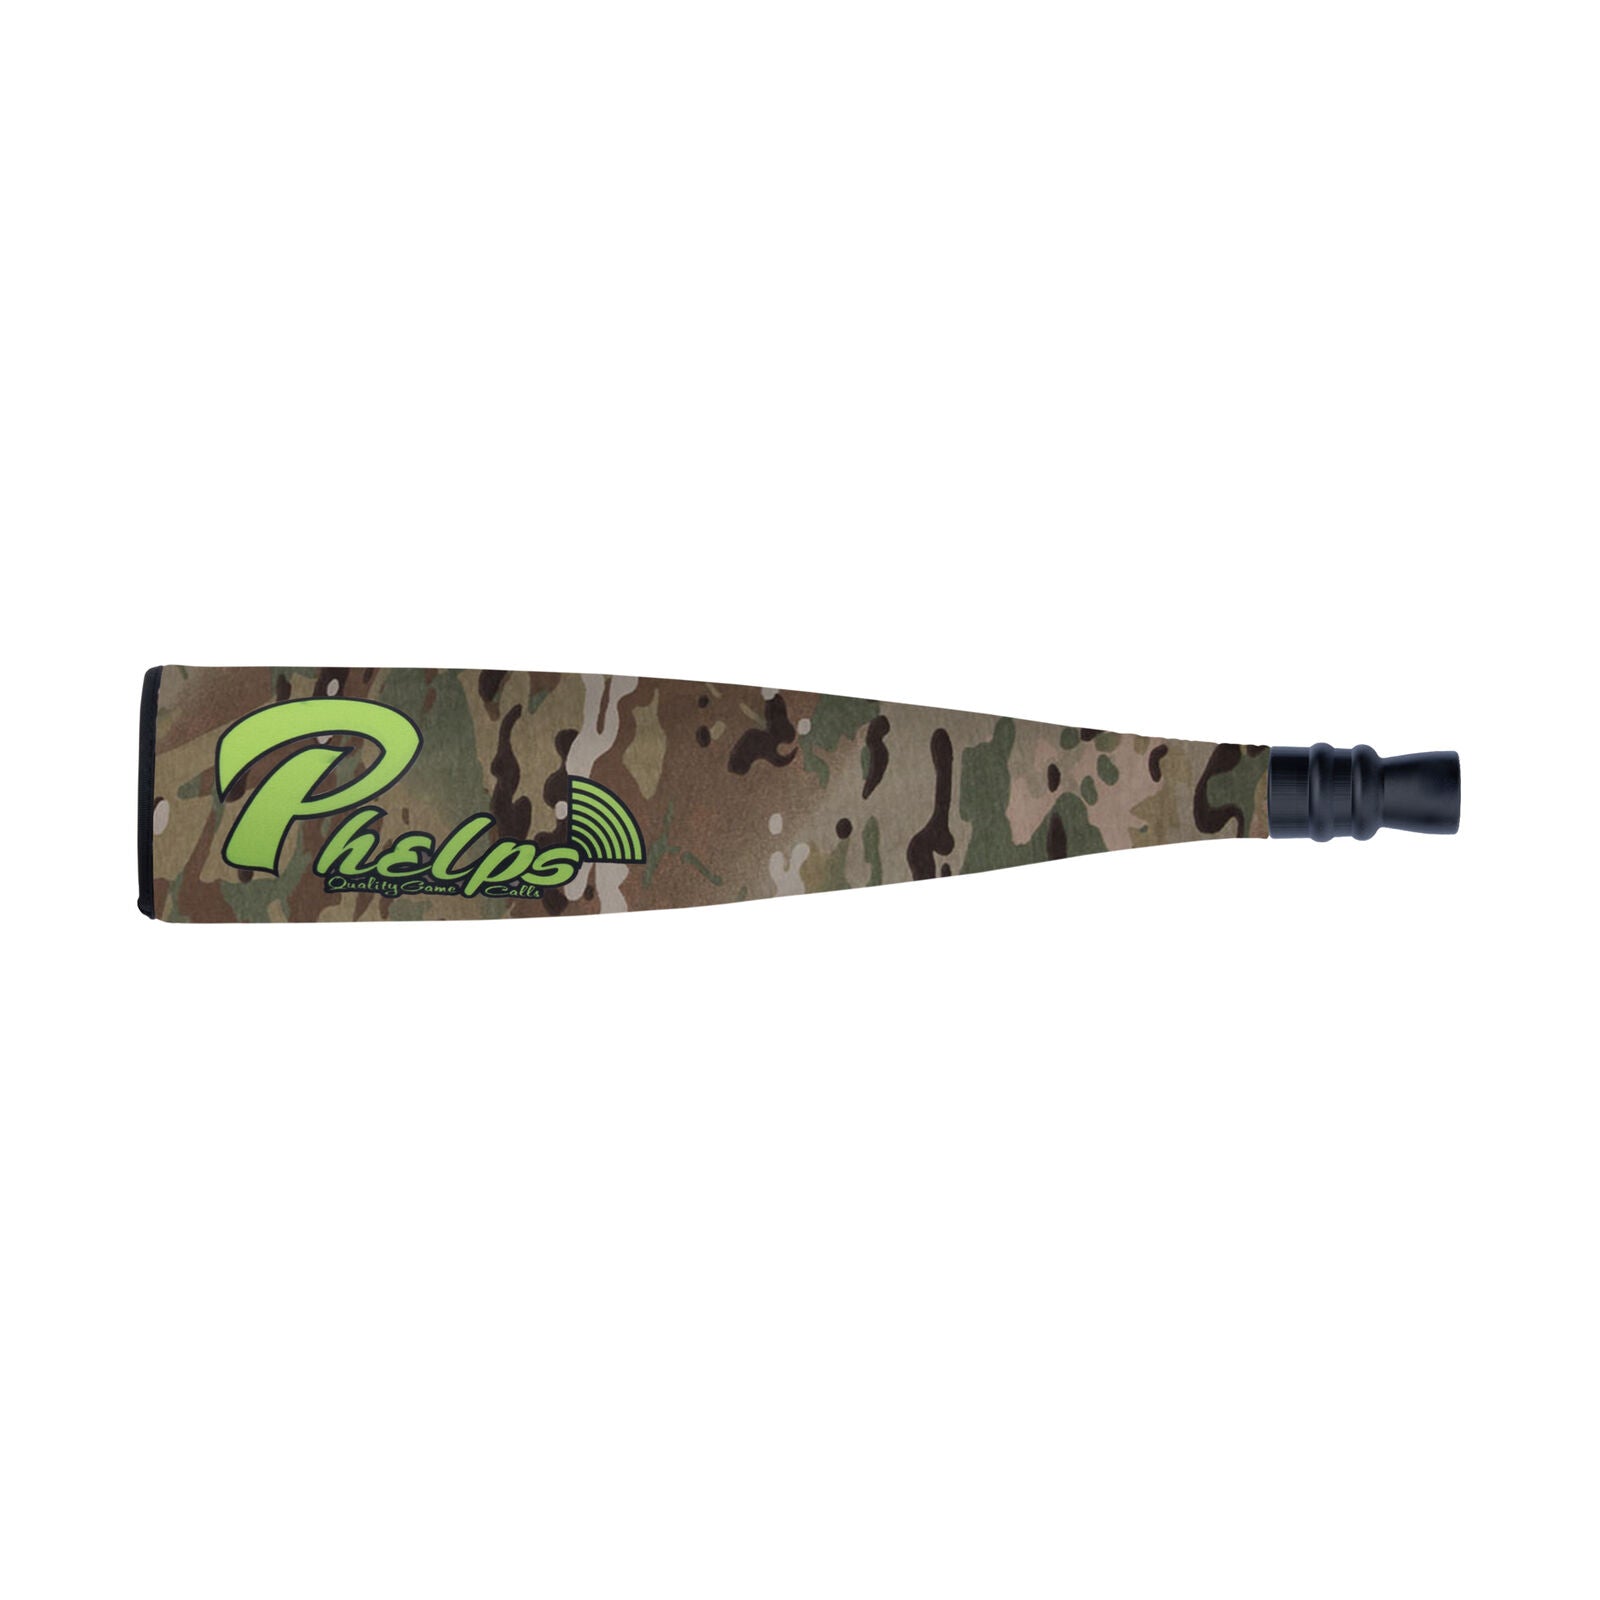 843380129677 Phelps metal bugle tube color woodland camo with flared mouthpiece